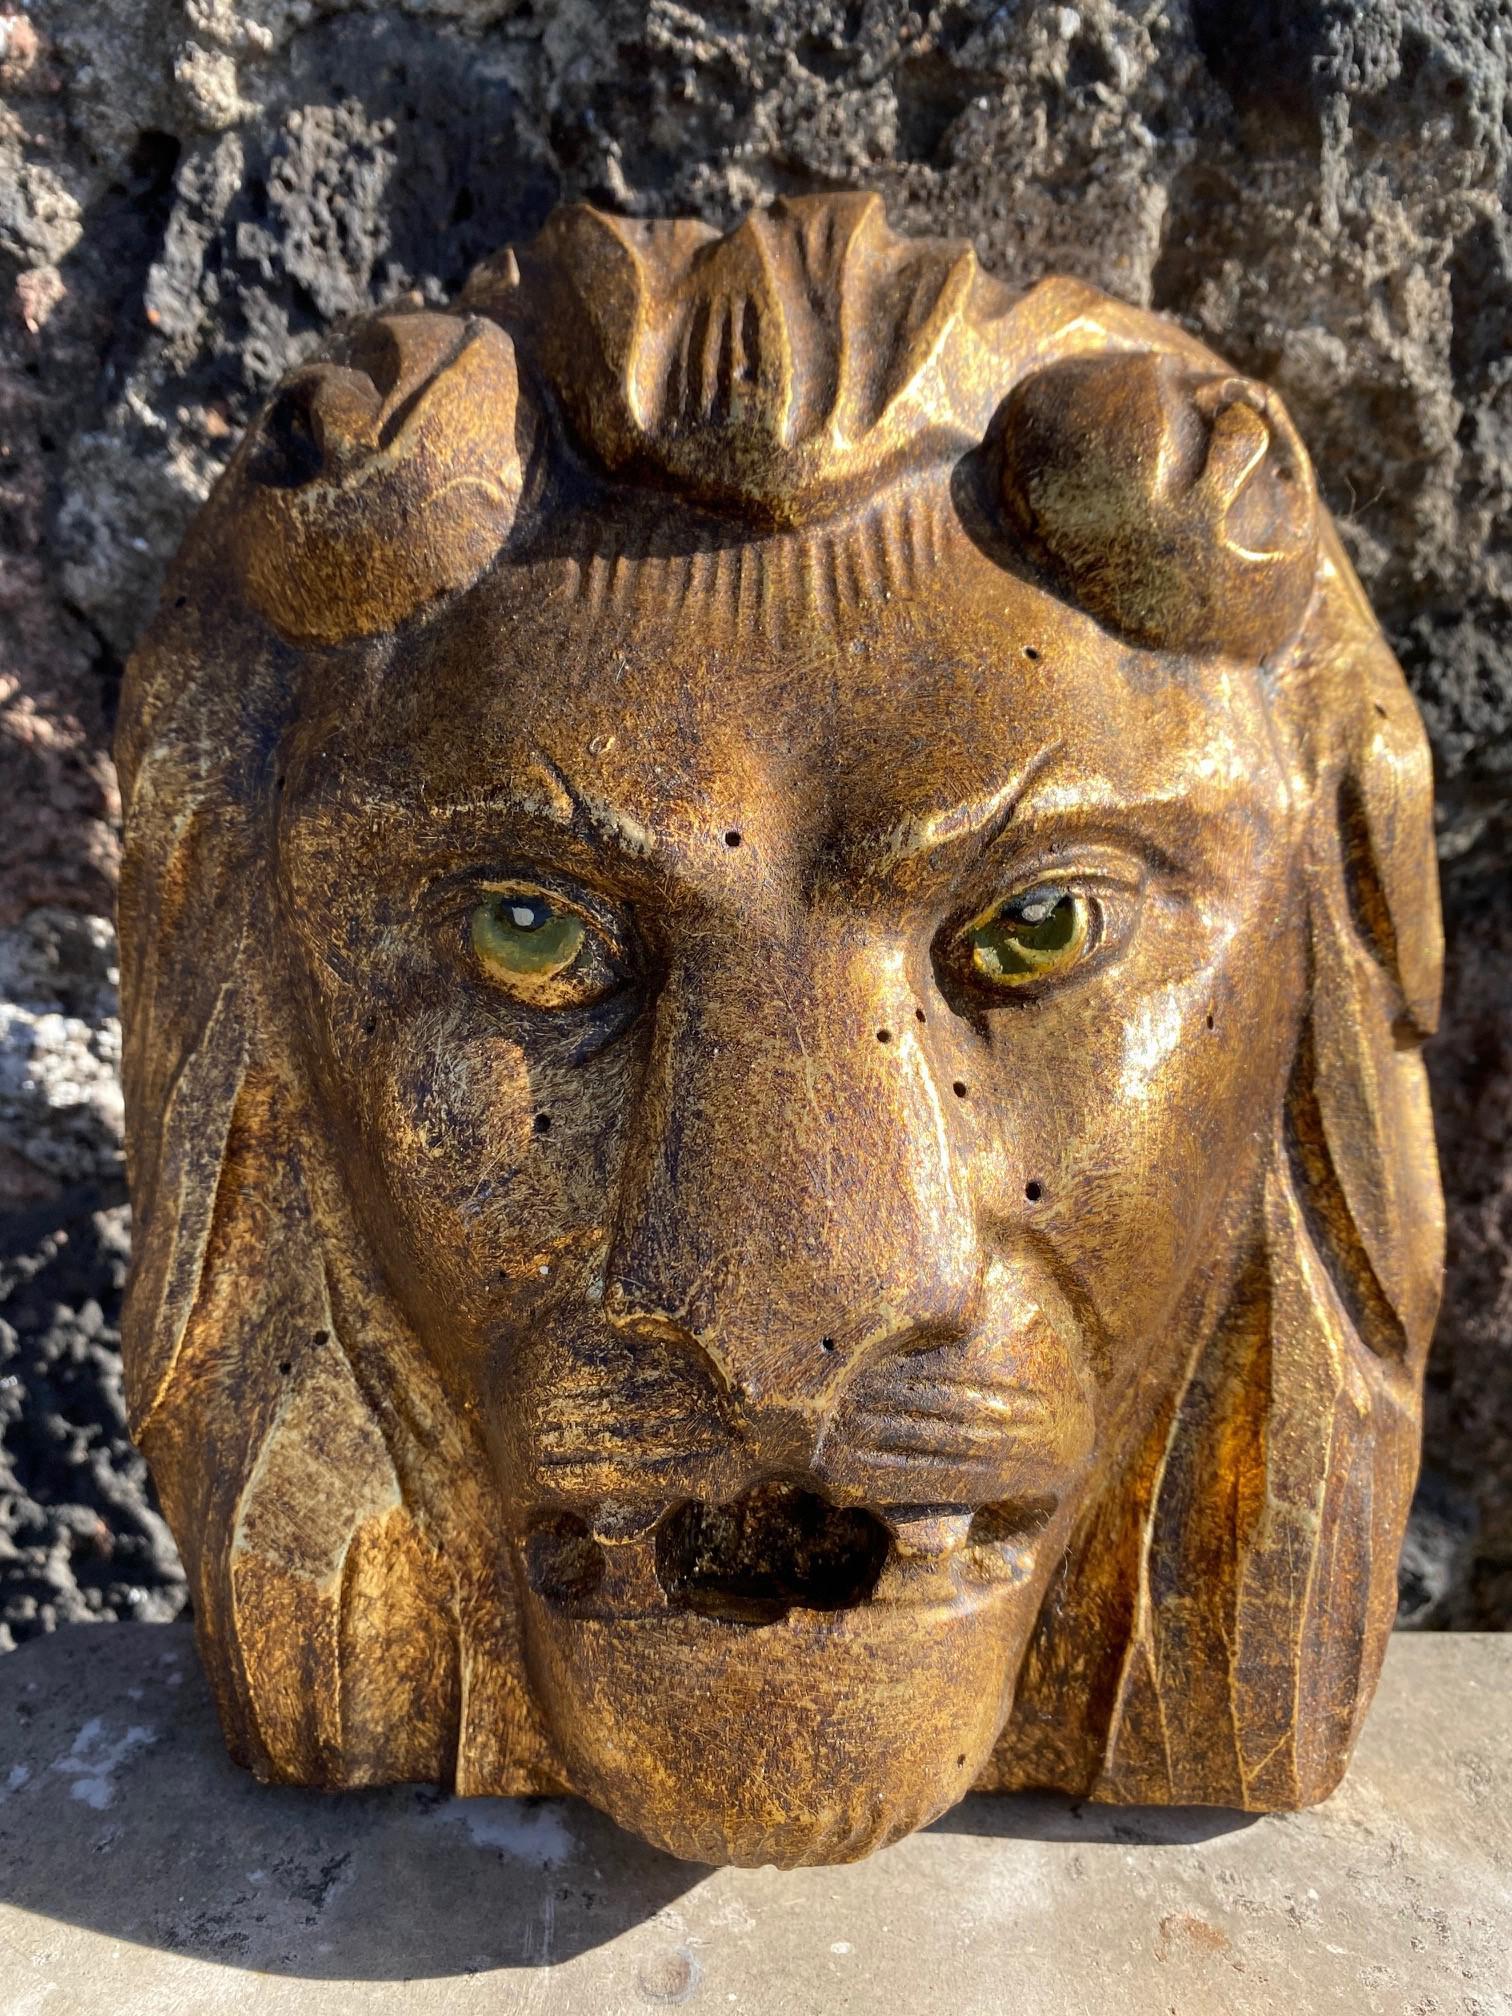 19th Century, Ancient Golden wooden wall sculpture Depicting A Lion's Head. Object of good quality and ideal for artistic compositions or wall decoration.